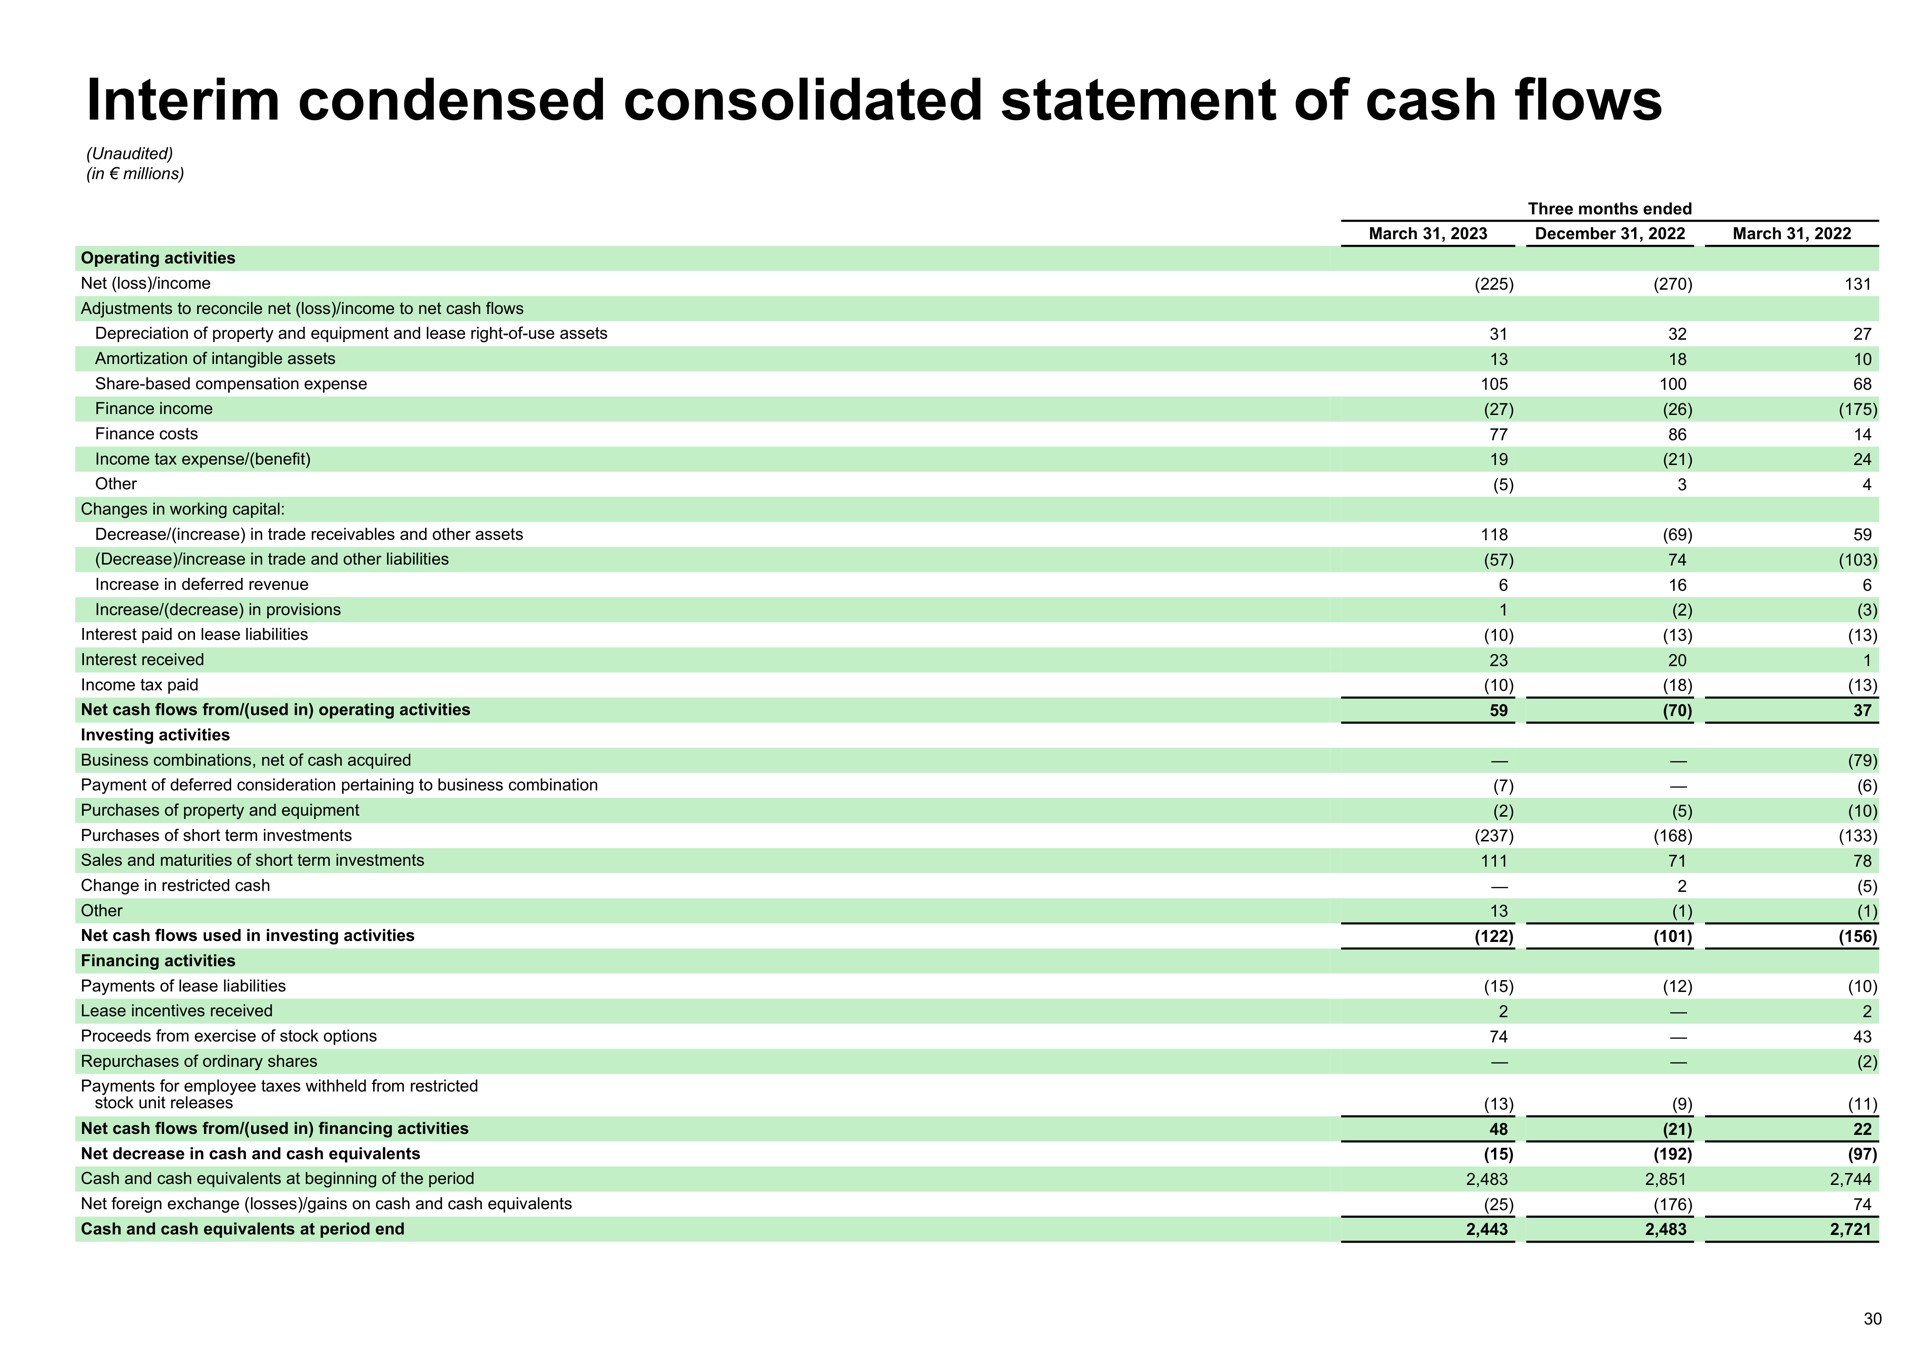 interim condensed consolidated statement of cash flows | Spotify